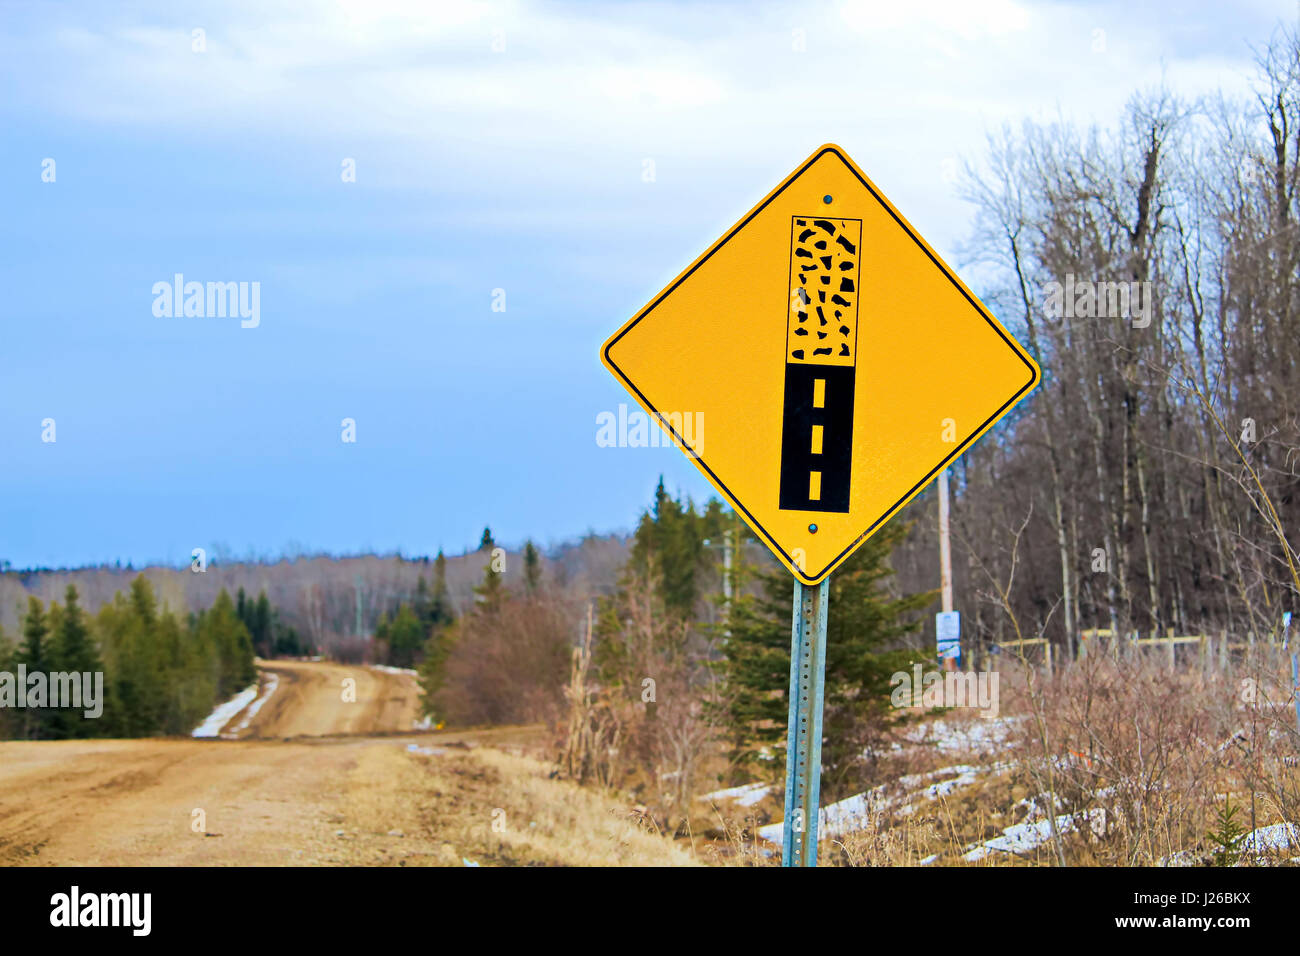 Pavement ends warning sign on a back road. Stock Photo